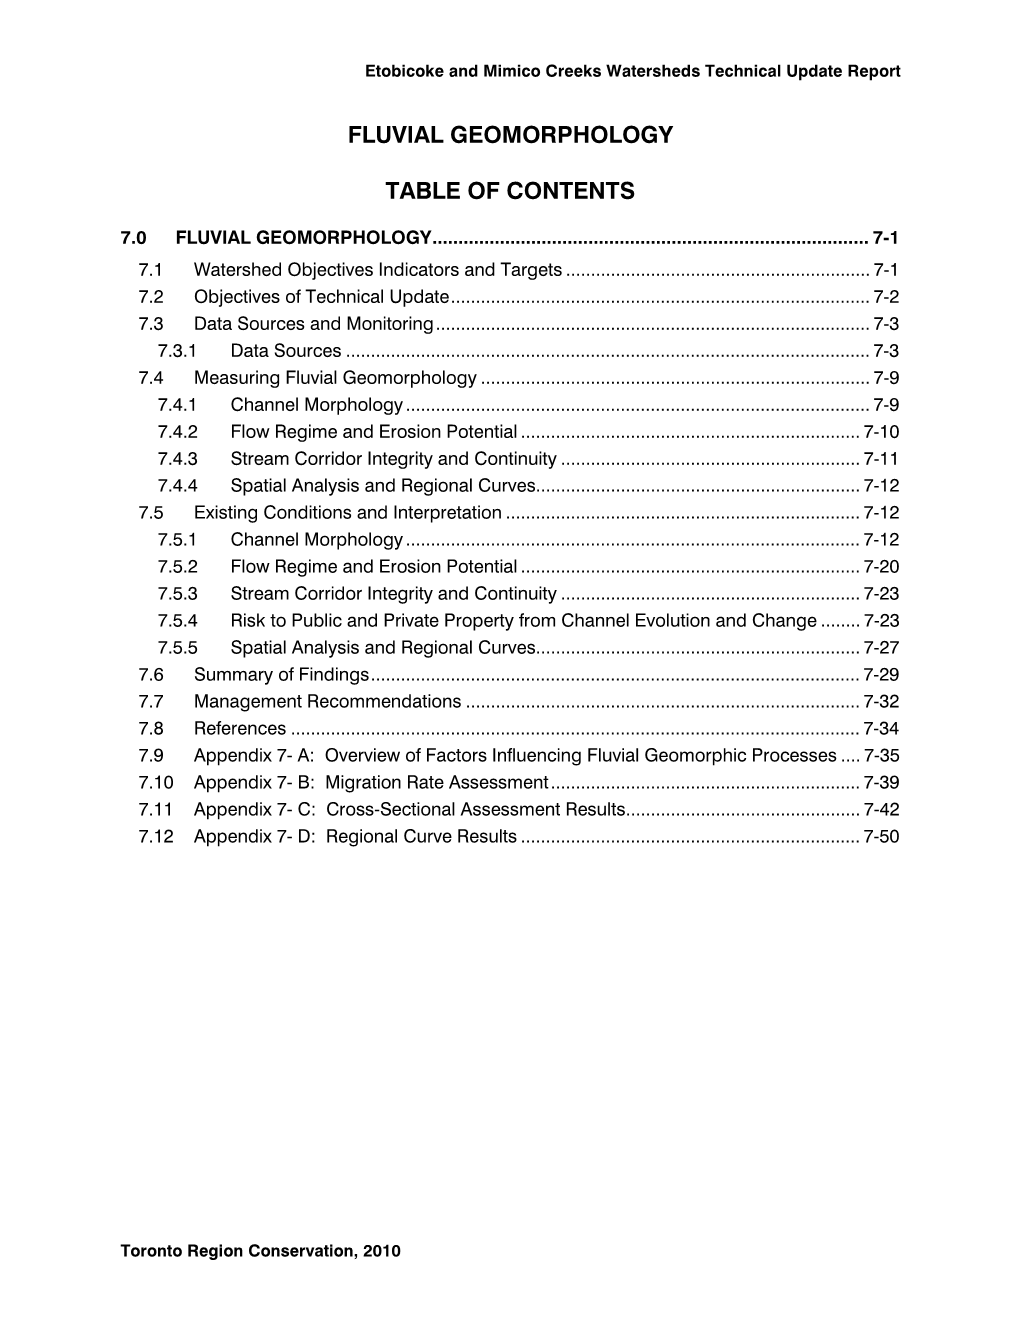 Fluvial Geomorphology Table of Contents